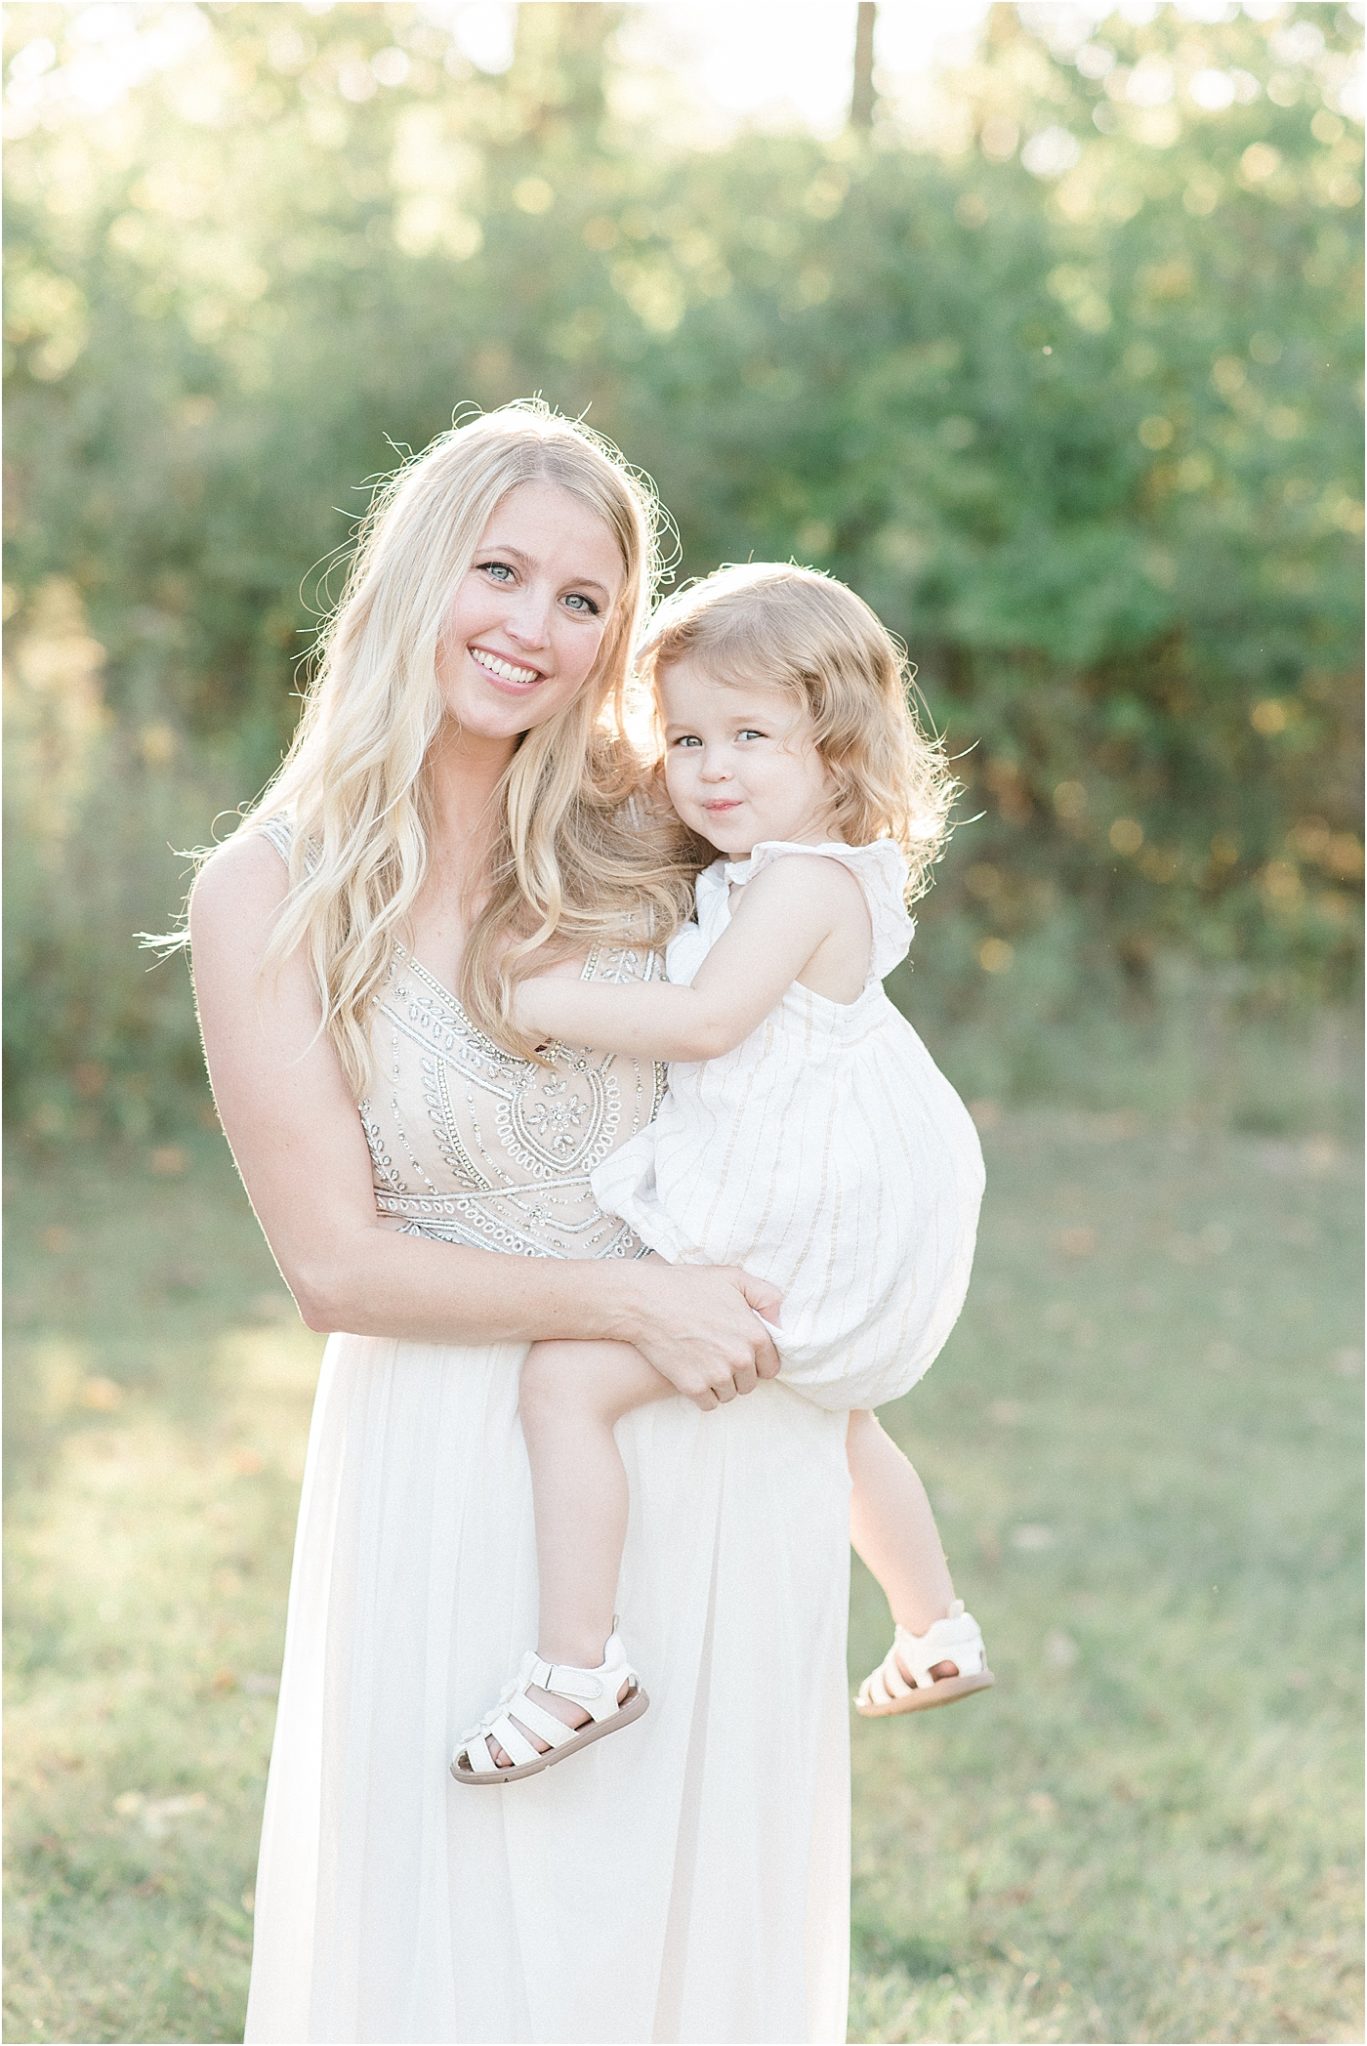 Sunset family session in Noblesville, Indiana with Lindsay Konopa Photography.